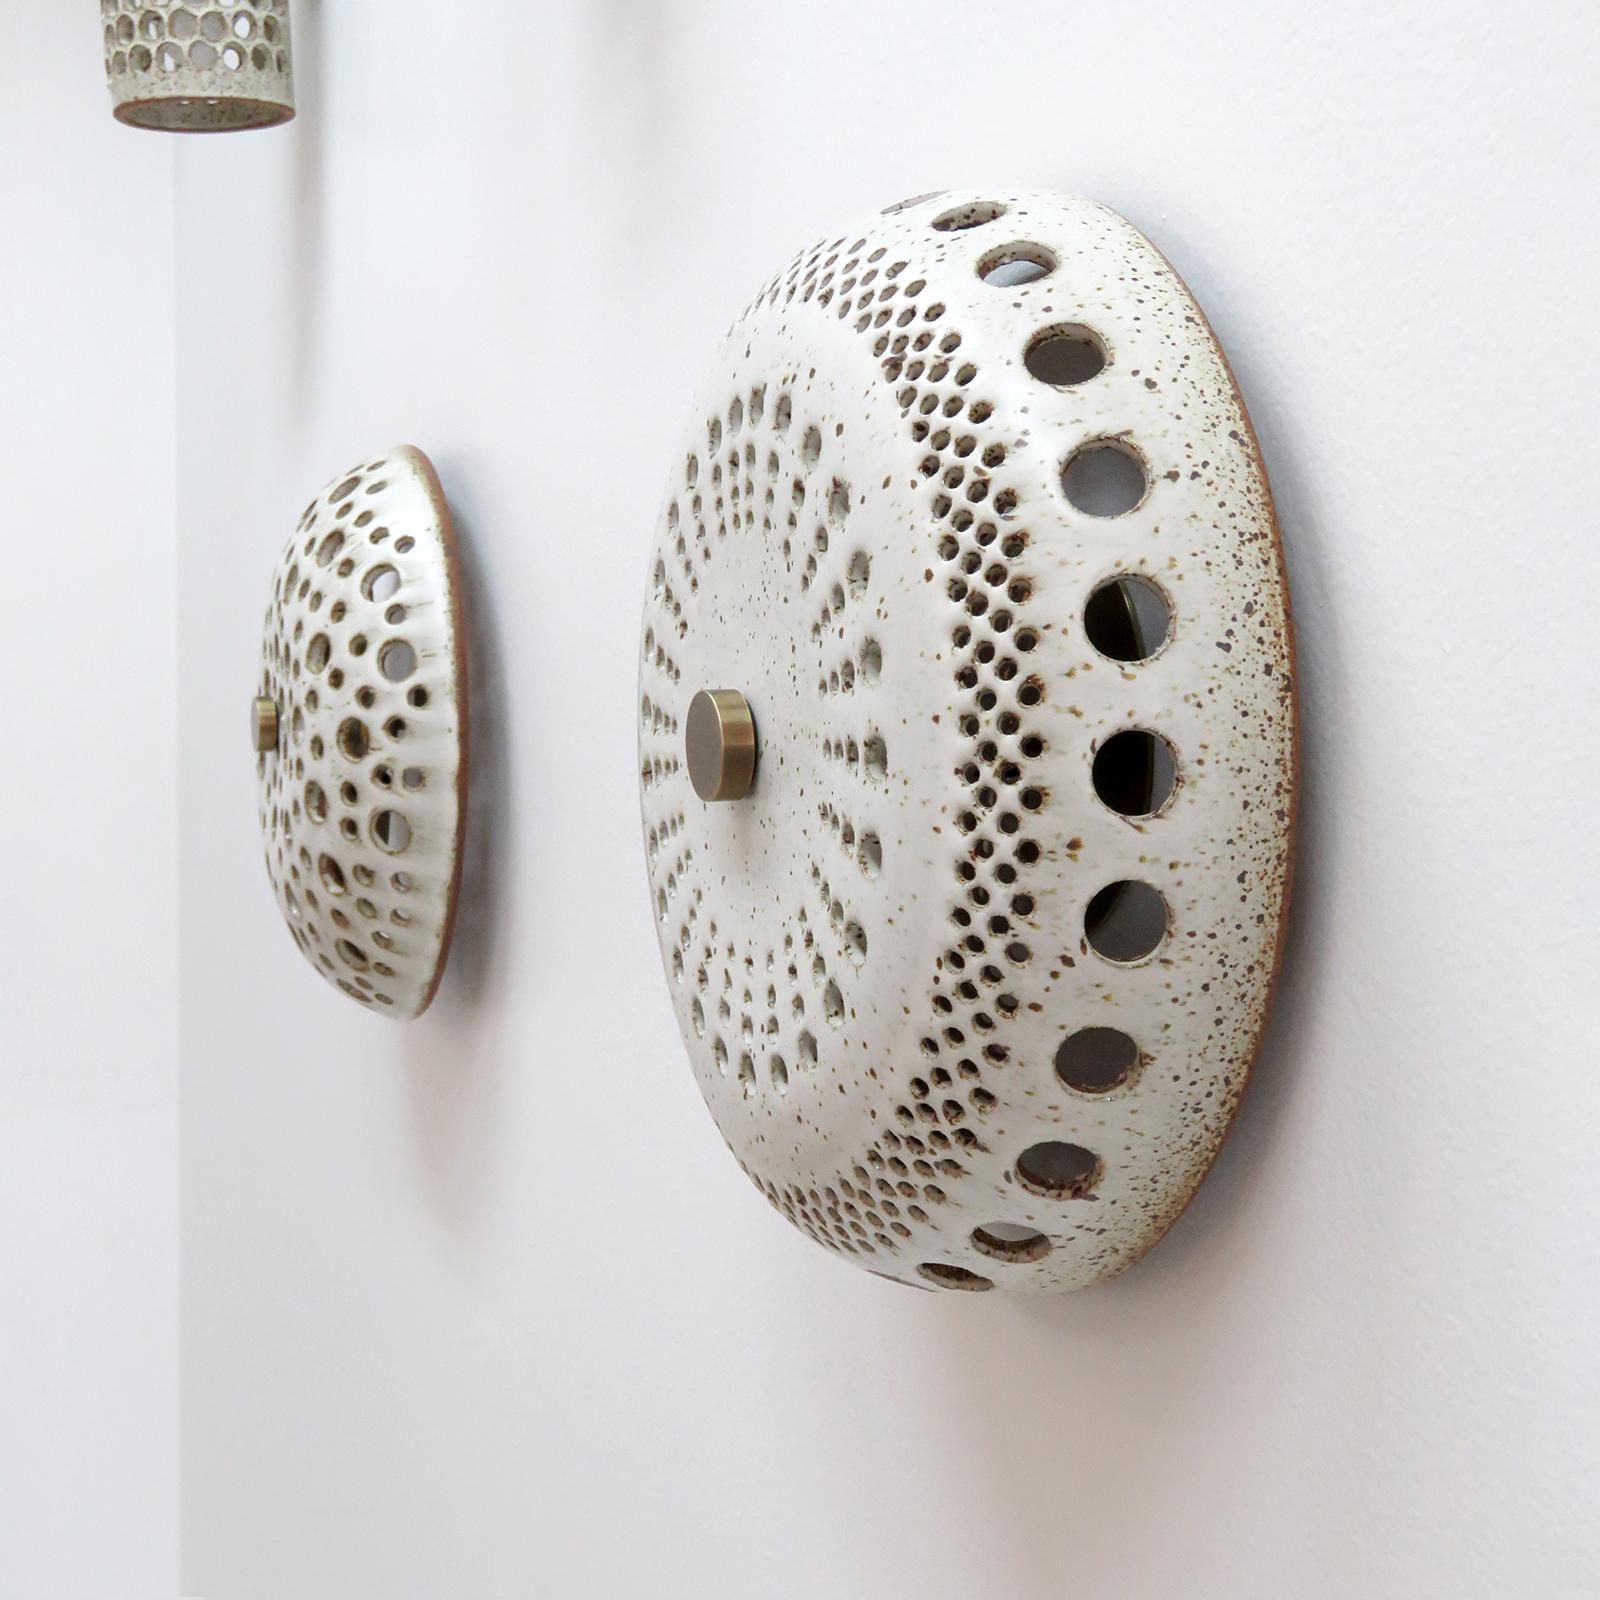 American Ceramic Wall Light No.12 by Heather Levine